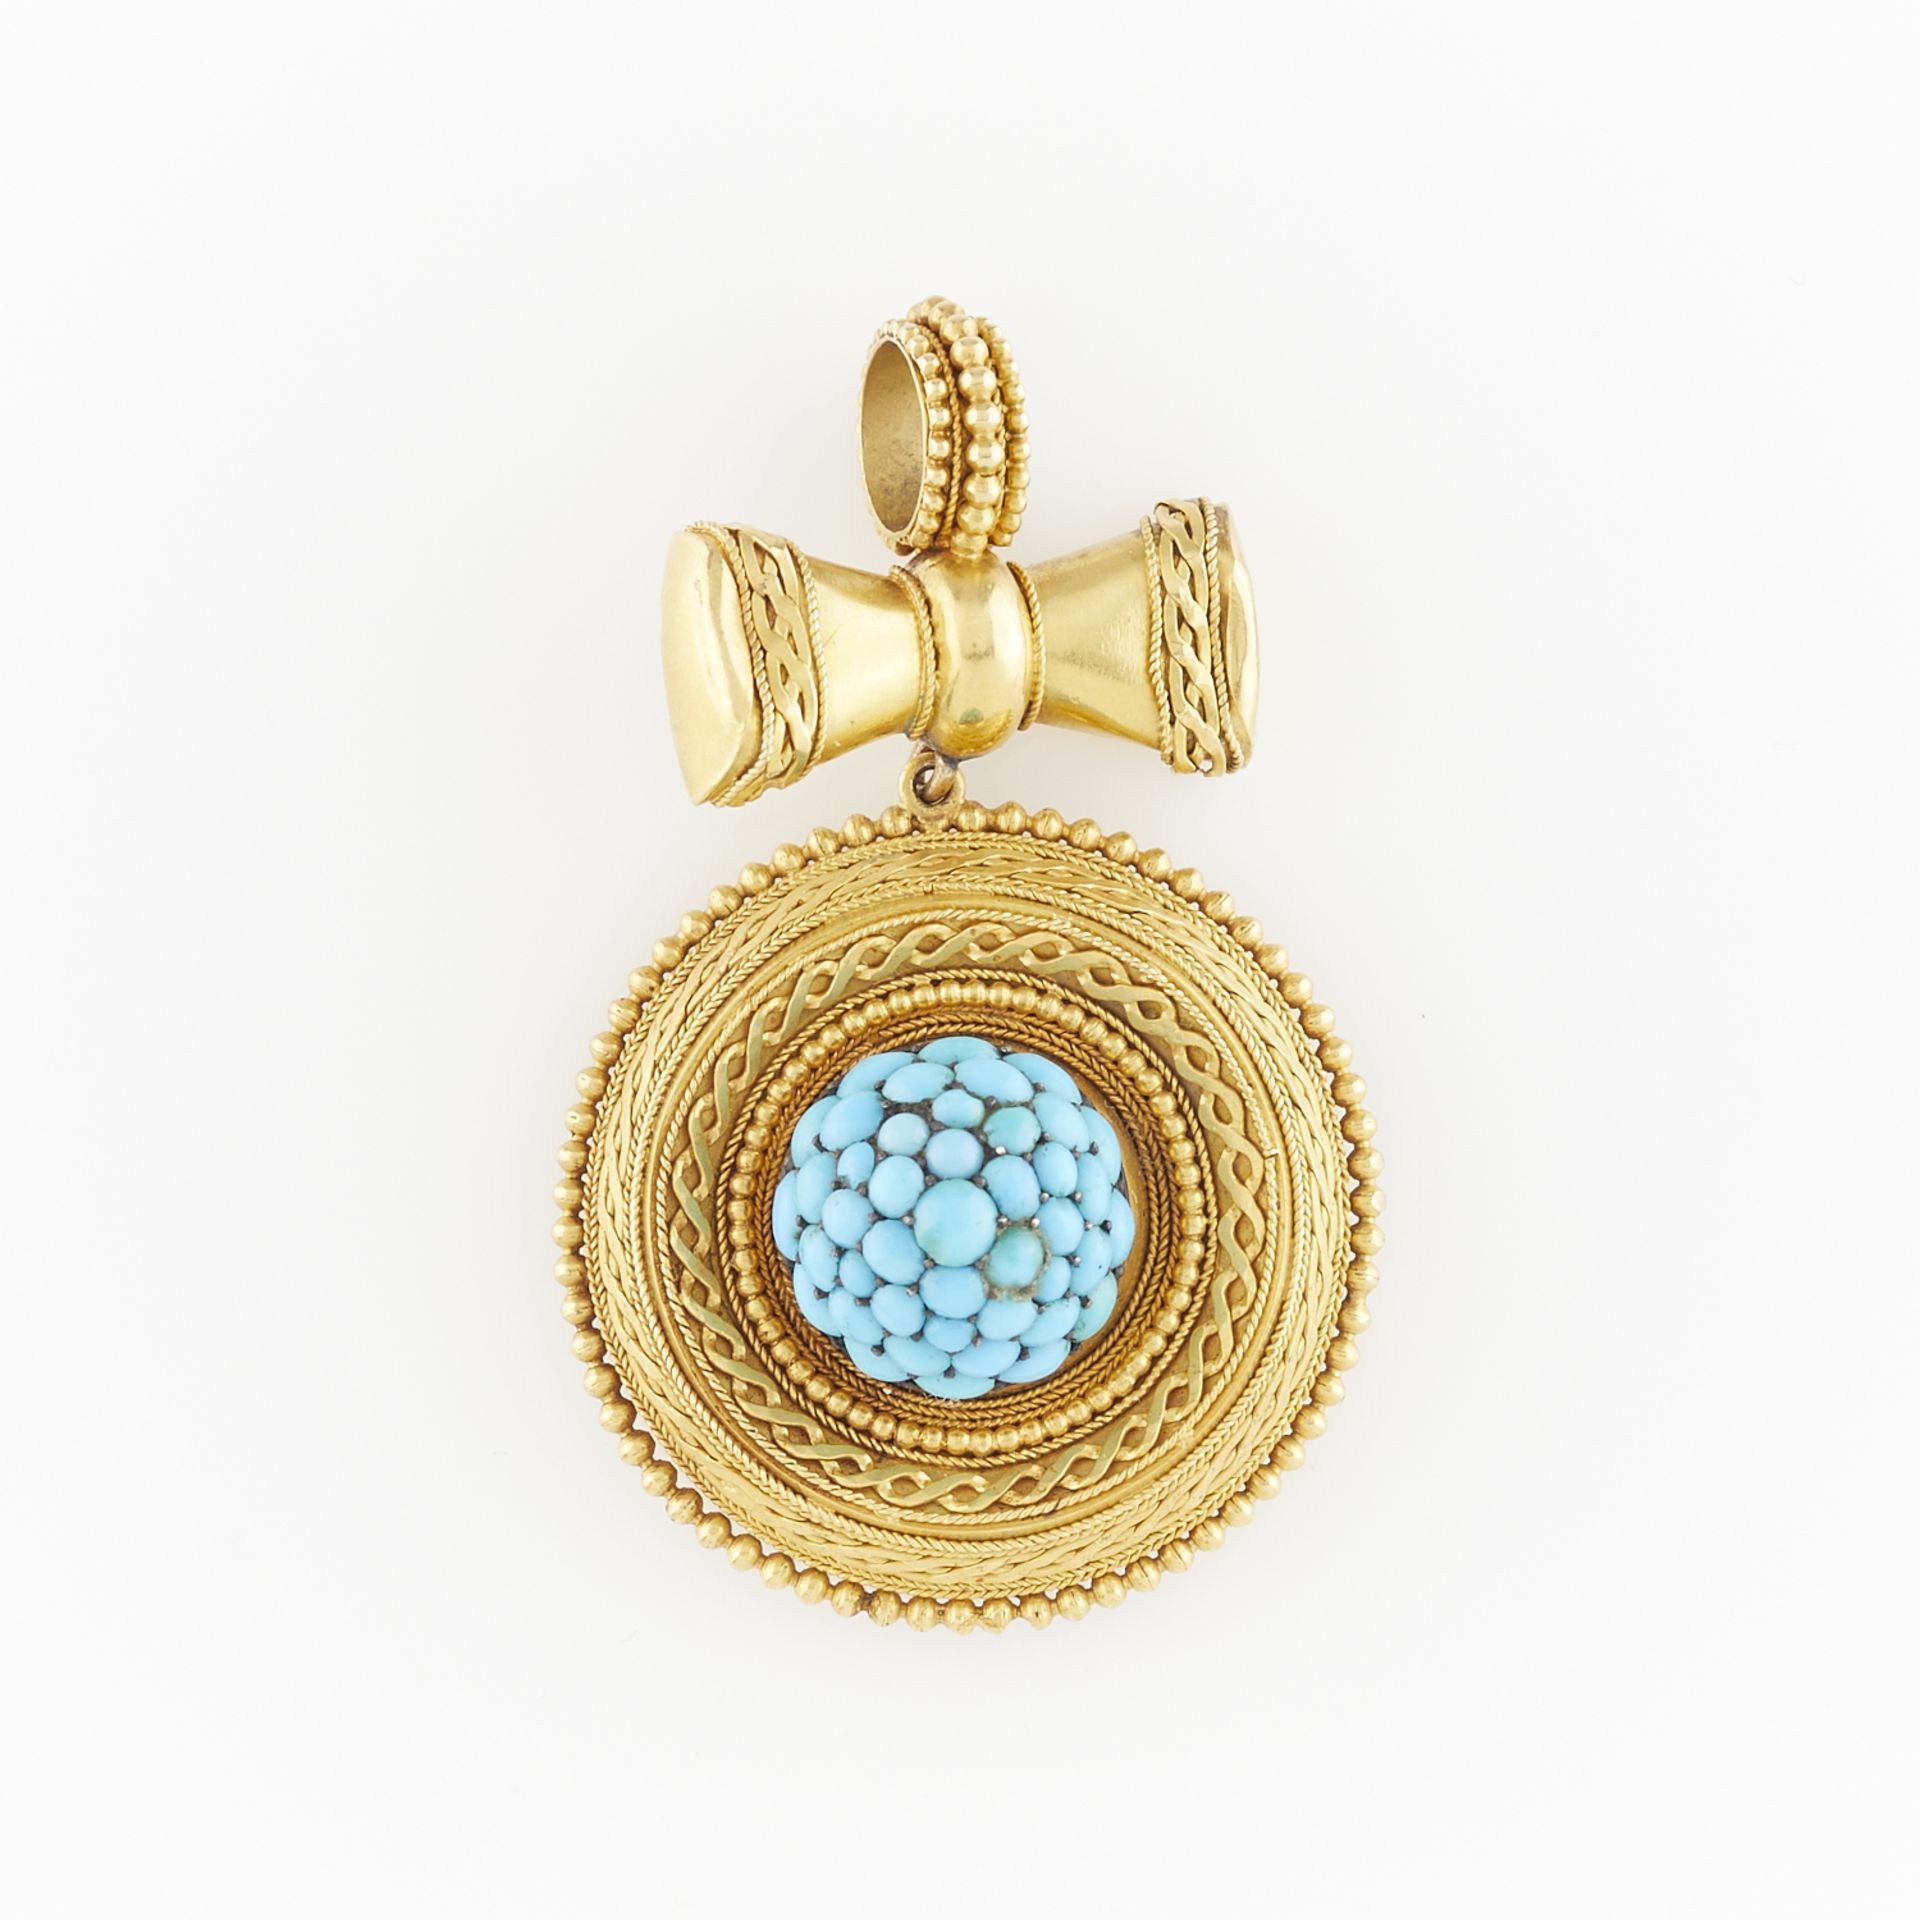 Etruscan Revival Gold & Turquoise Pendant